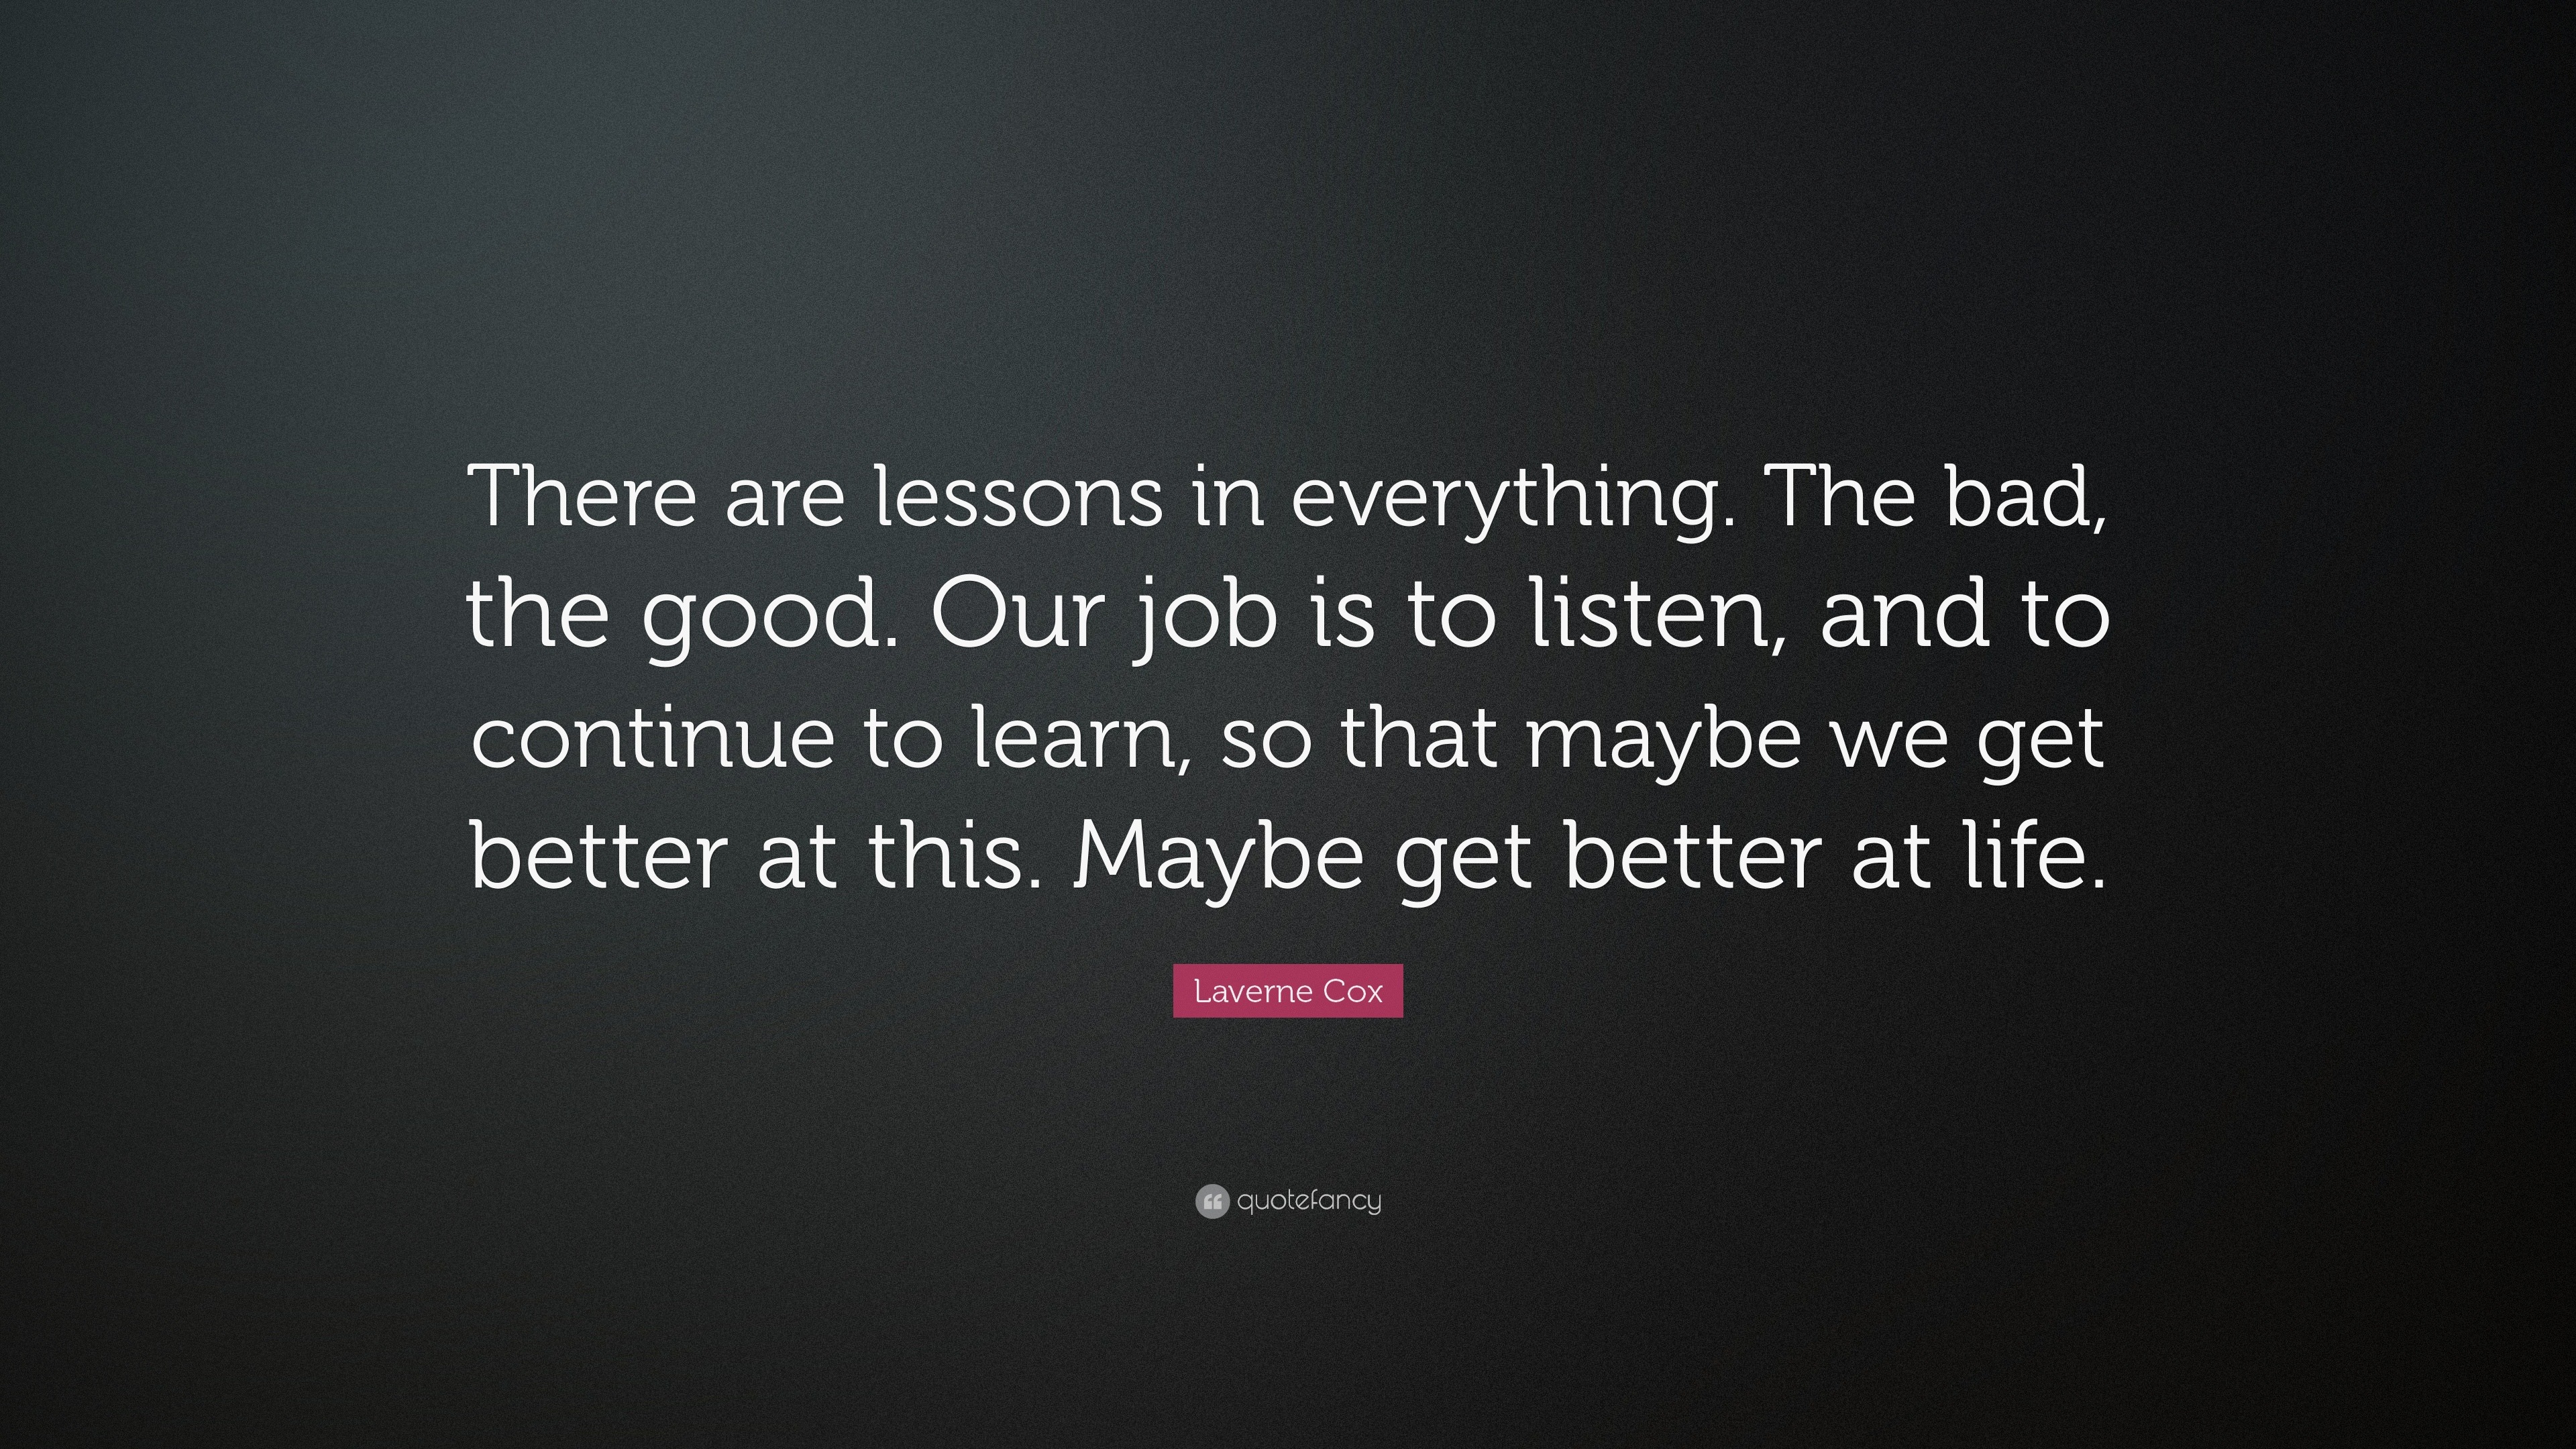 Laverne Cox Quote: "There are lessons in everything. The bad, the good. Our job is to listen ...